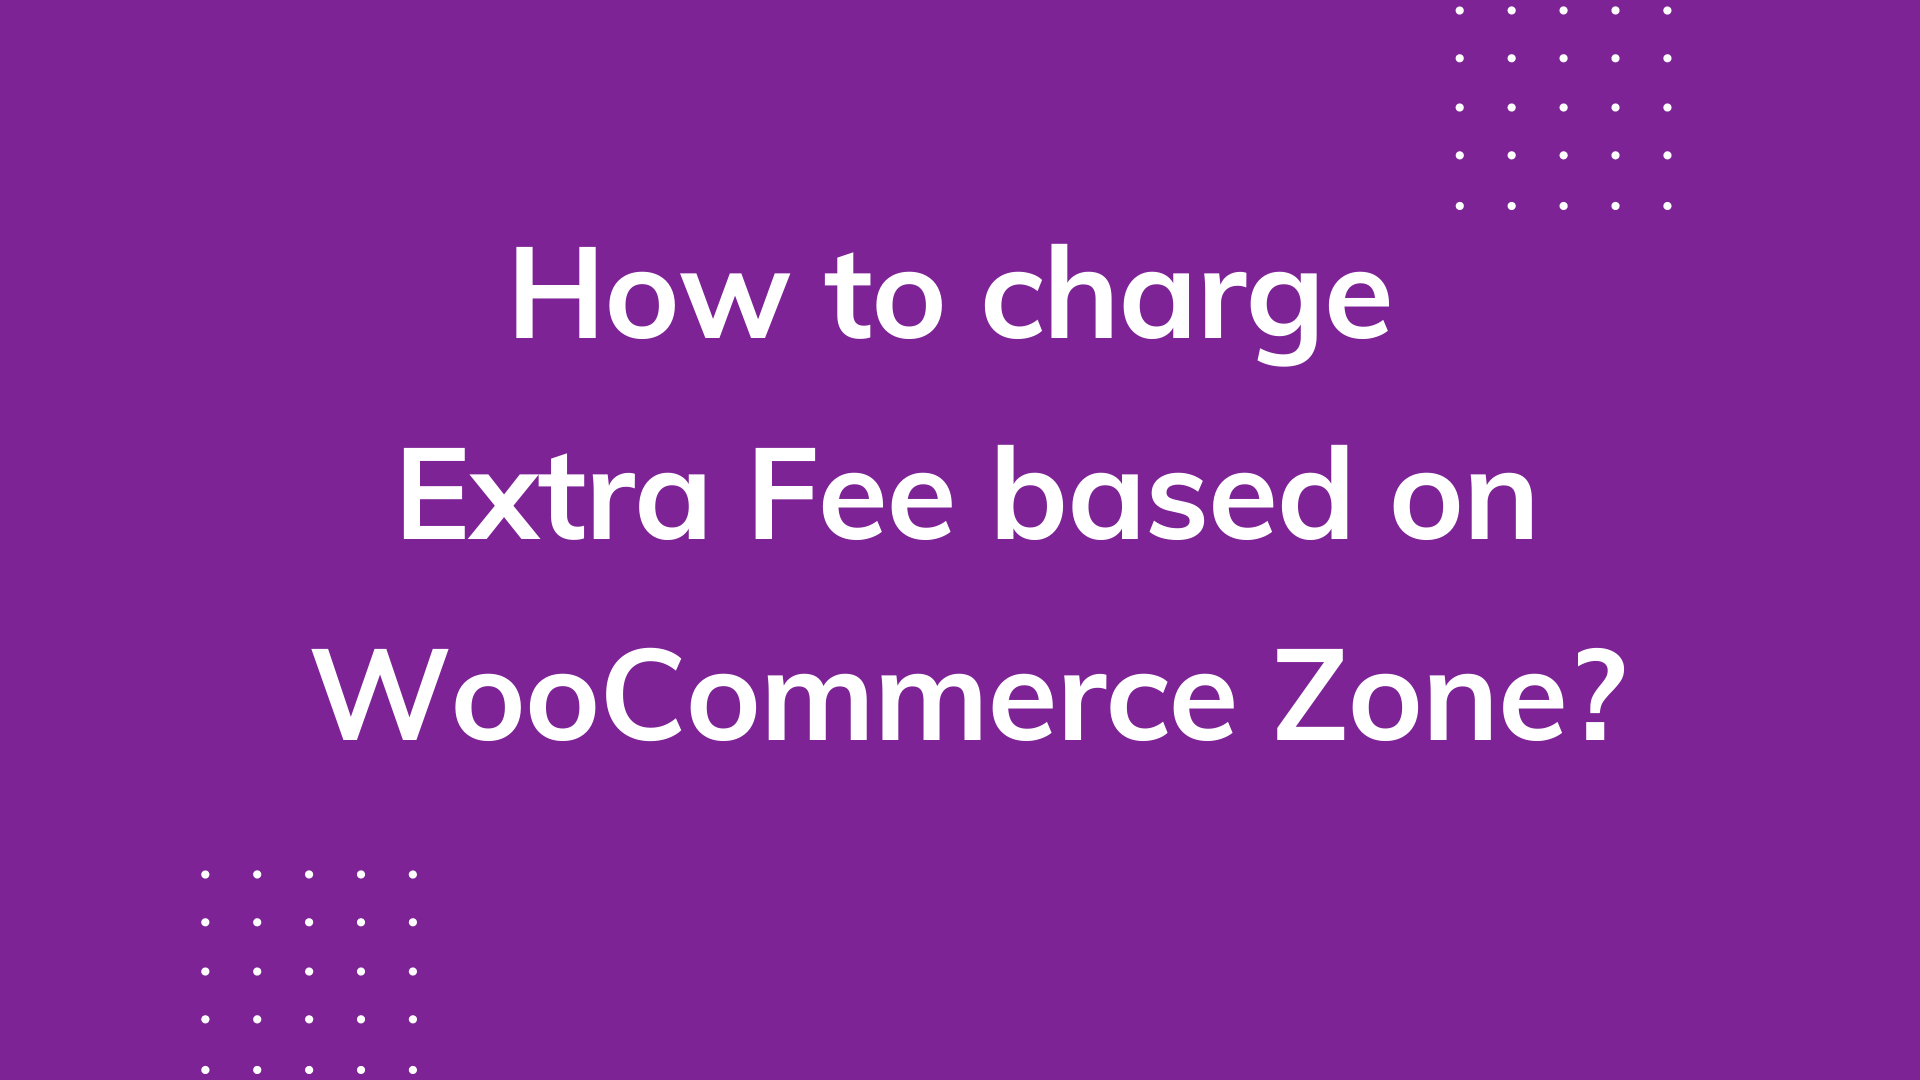 How to charge a WooCommerce extra fee based on a zone?